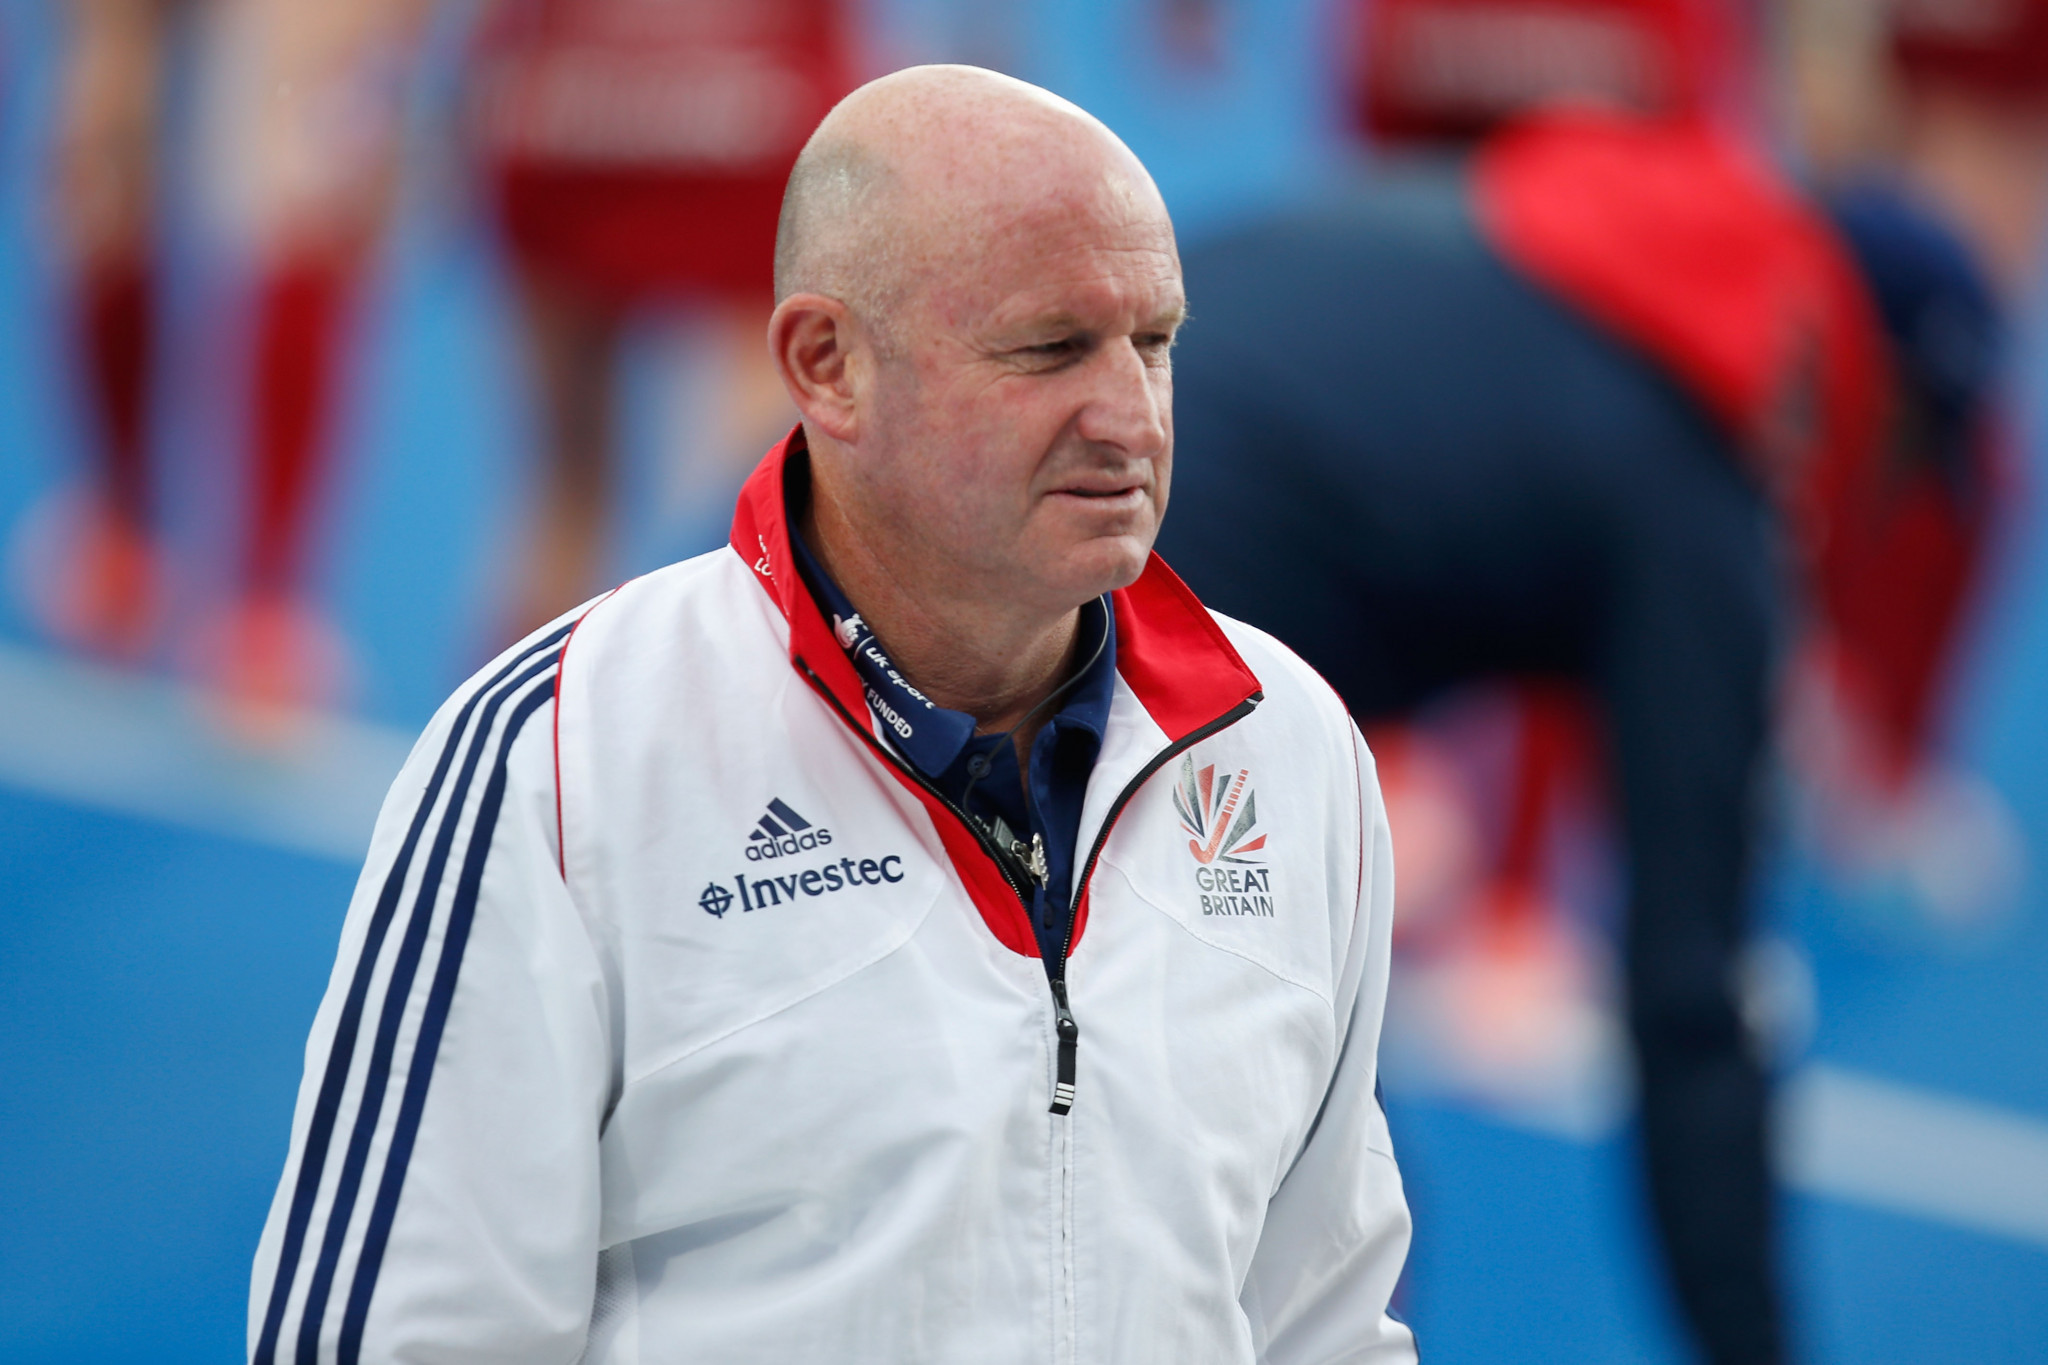 Great Britain assistant coach of Rio 2016 Olympic gold medal-winning women's hockey team dies